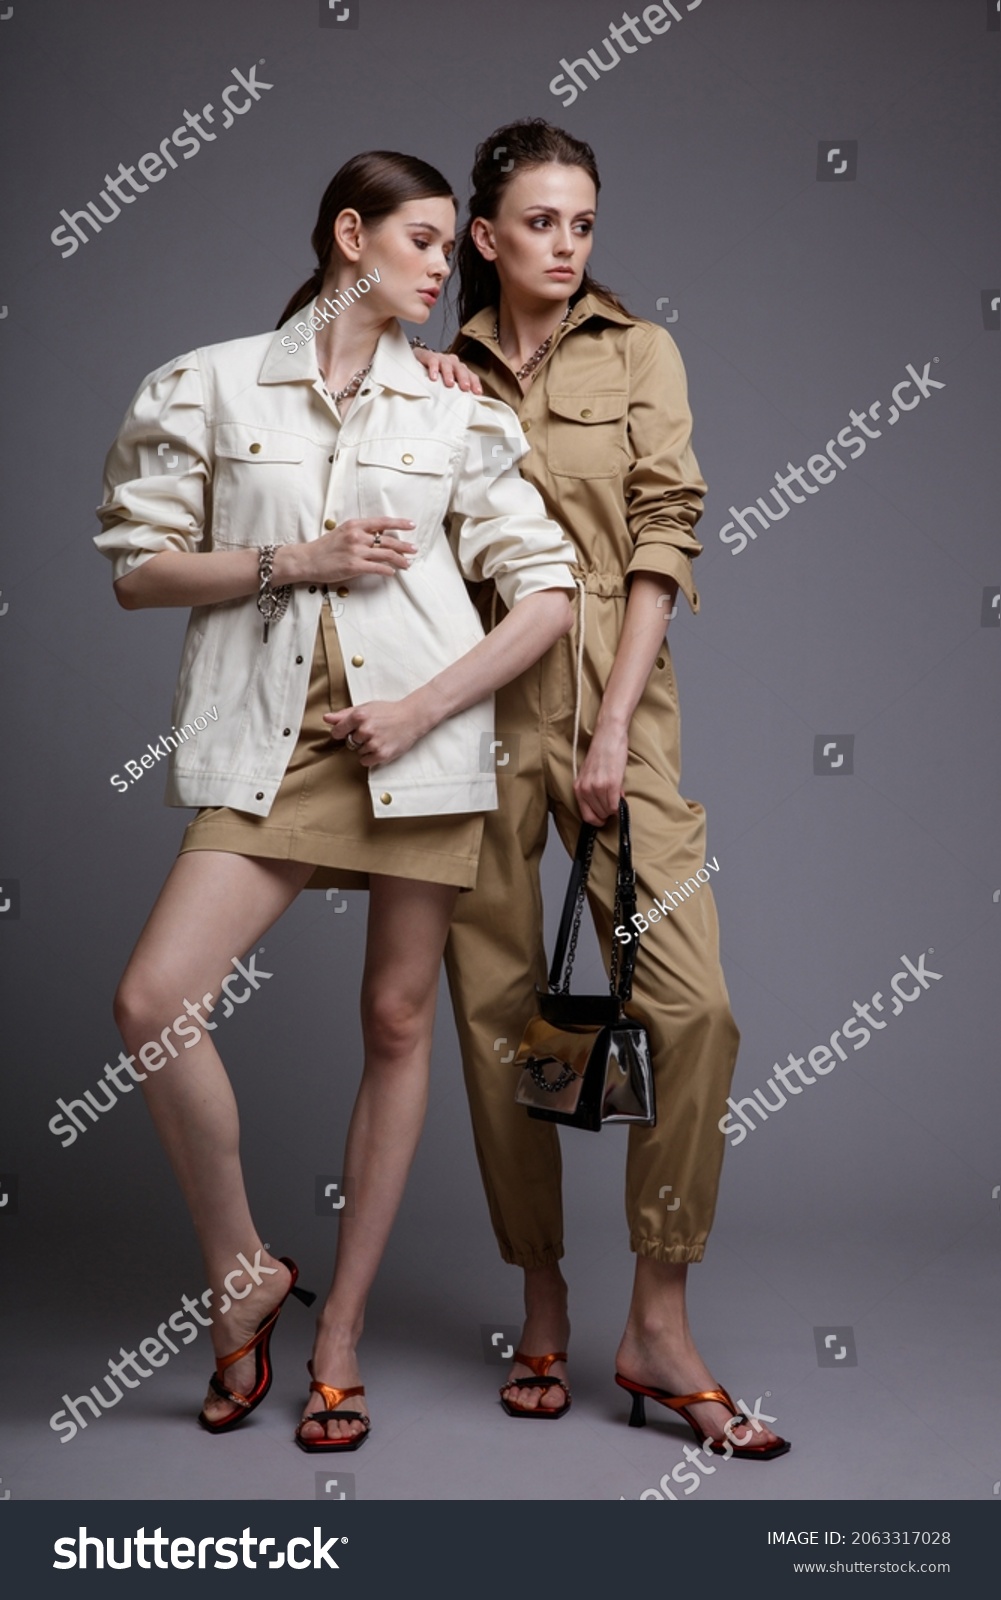 Two high fashion models in white shirt,  beige skirt, jumpsuit, accessories, handbag. Beautiful young women. Studio shot, portrait. Gray background.  Slim figure. Make up, hairstyle #2063317028